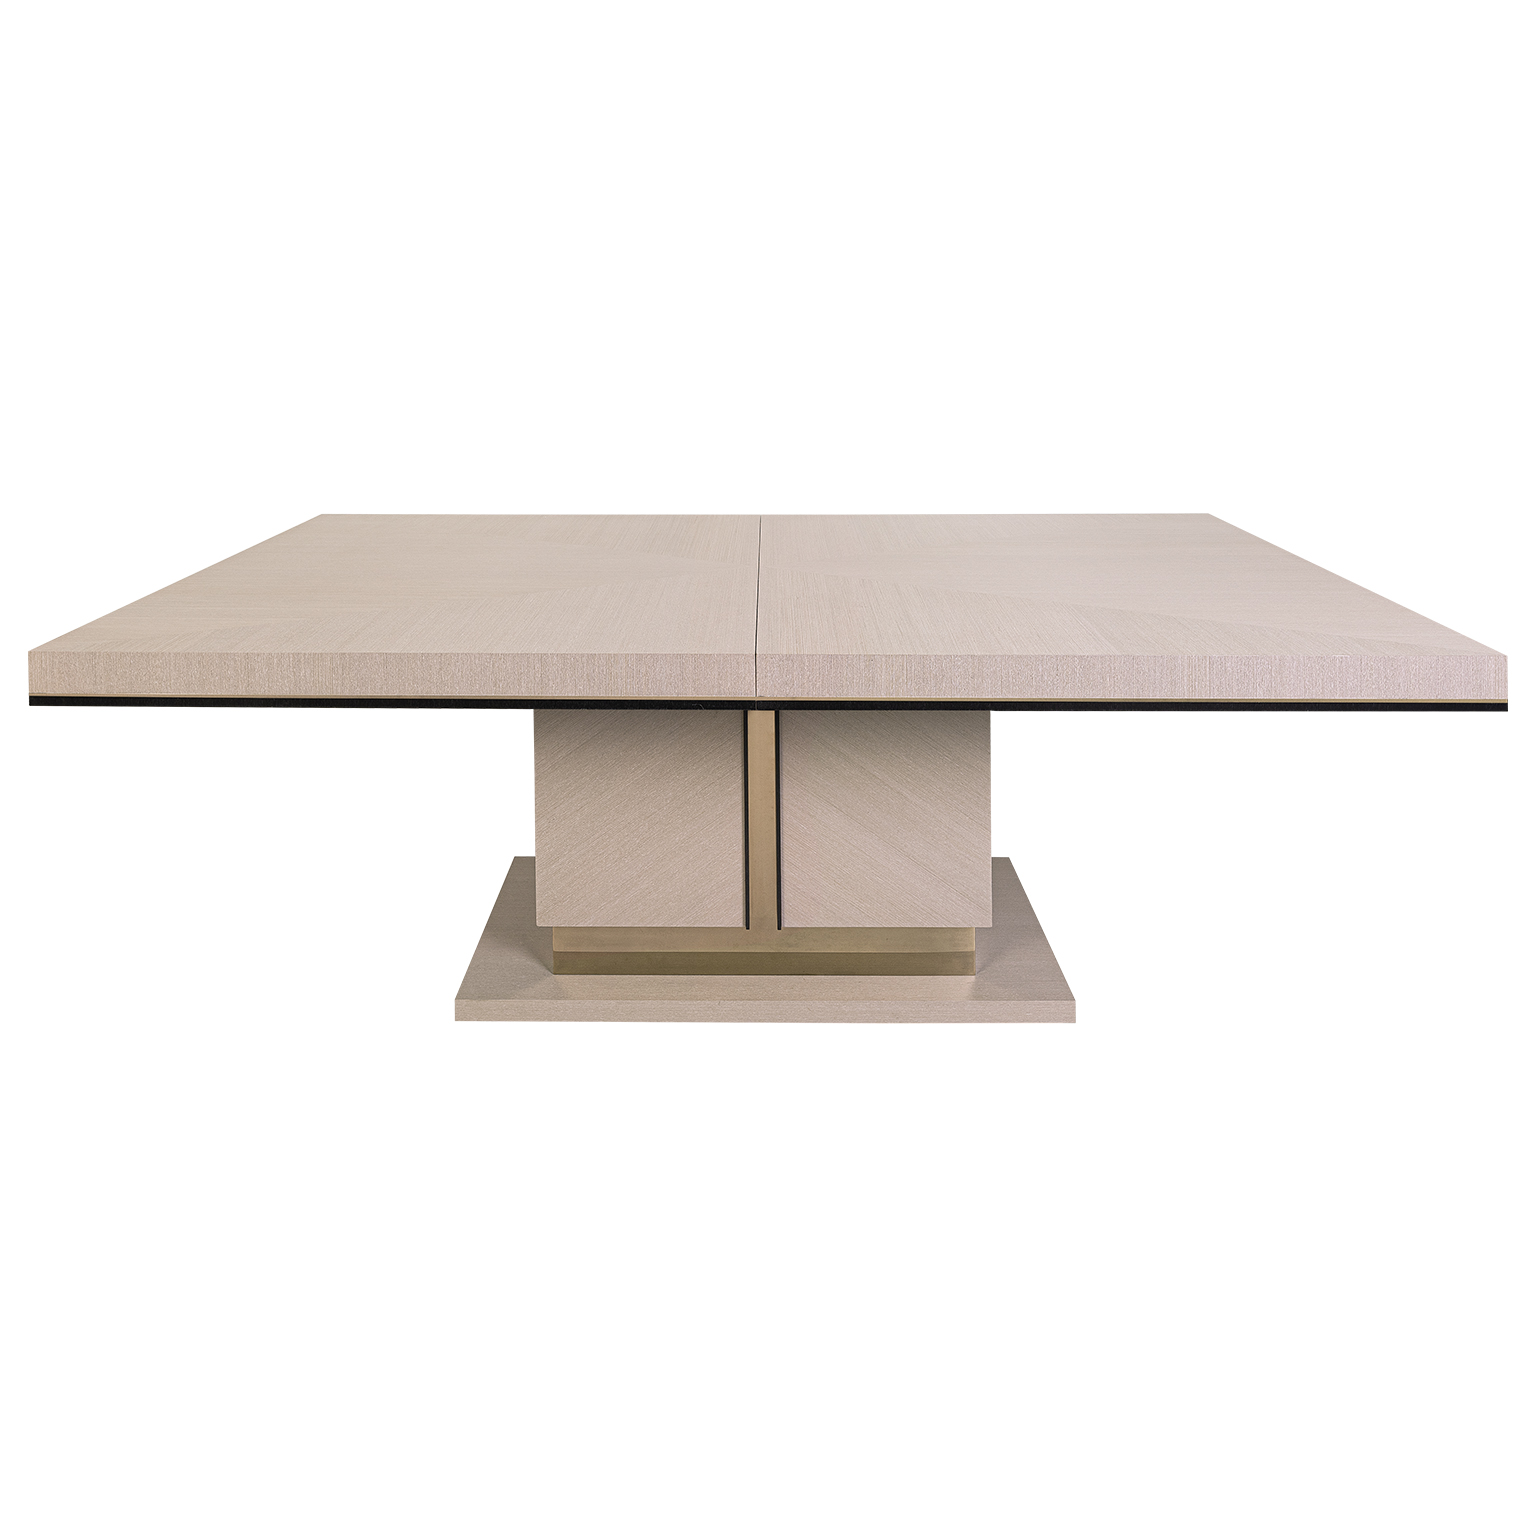 Rectangualr dining table in light oak with center extension and brushed brass details on base